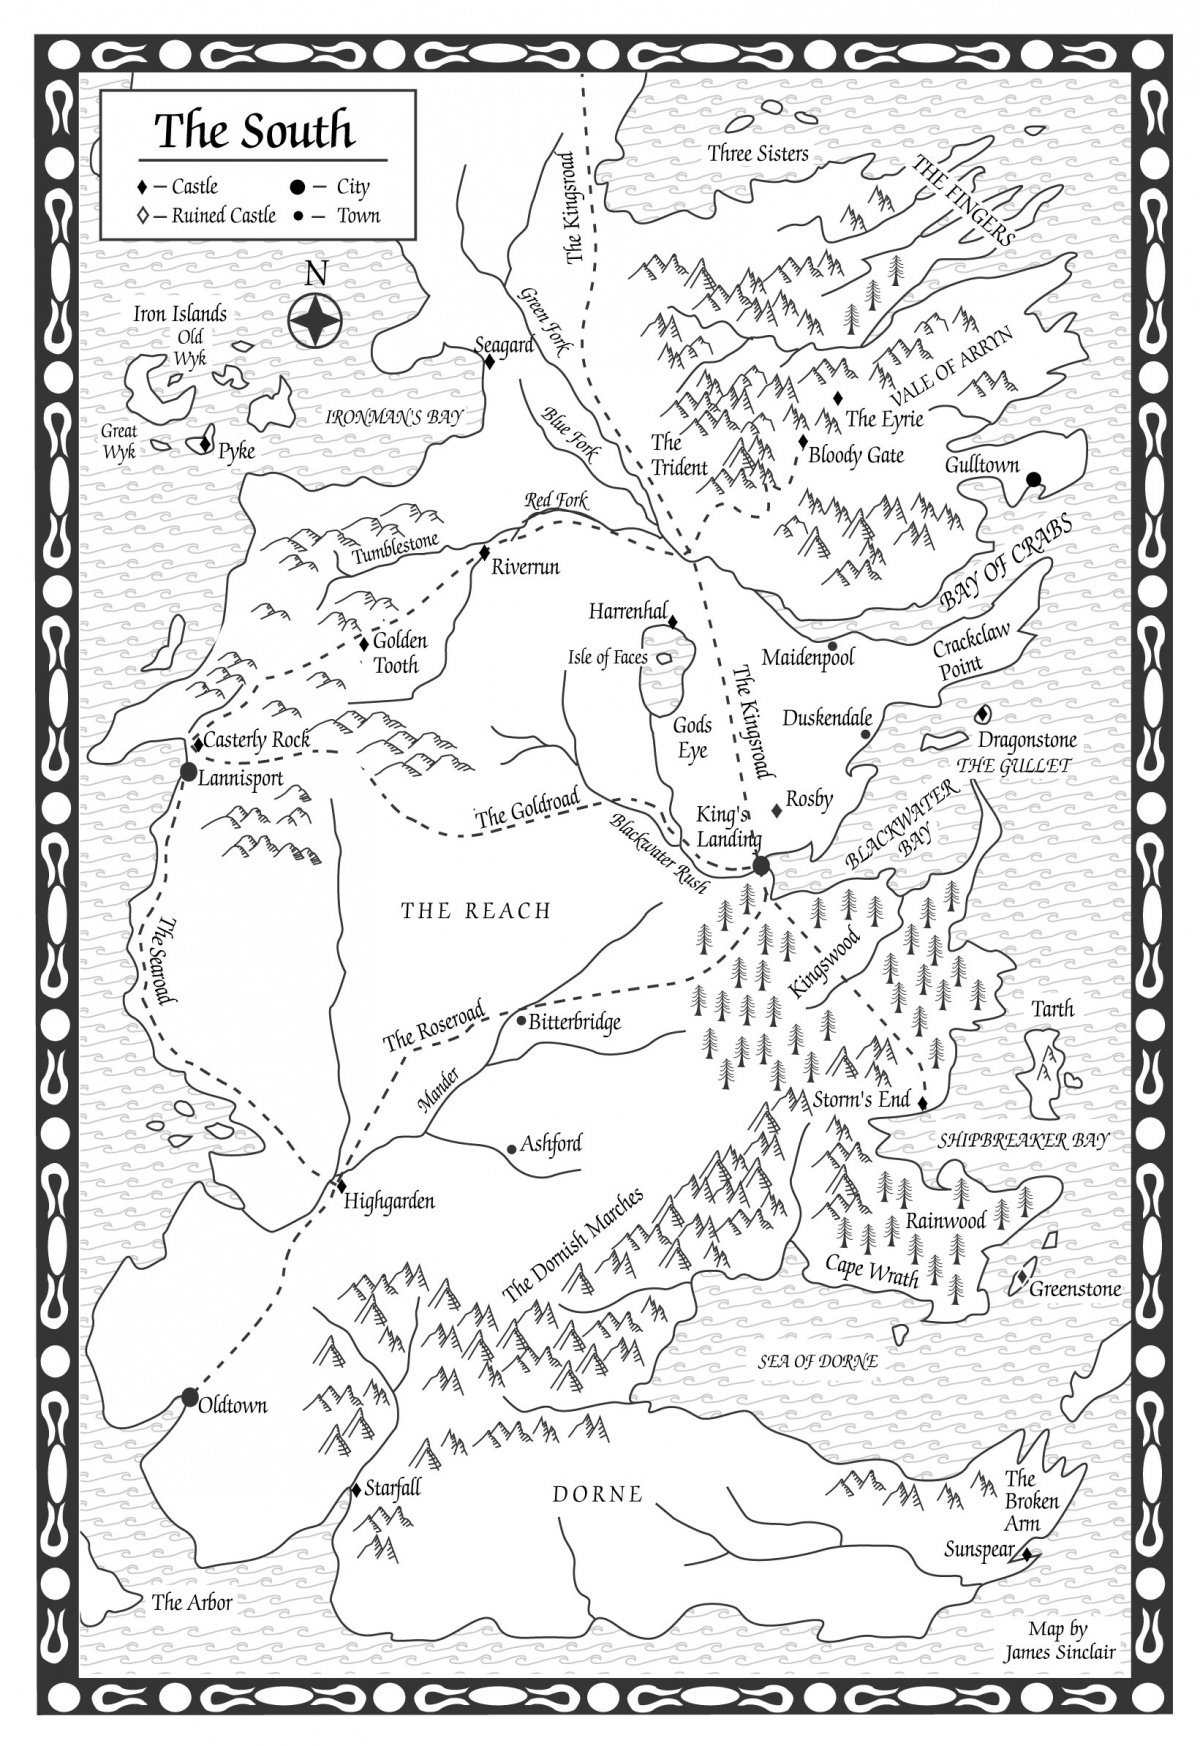 A Clash of Kings-Map of the South - A Wiki of Ice and Fire